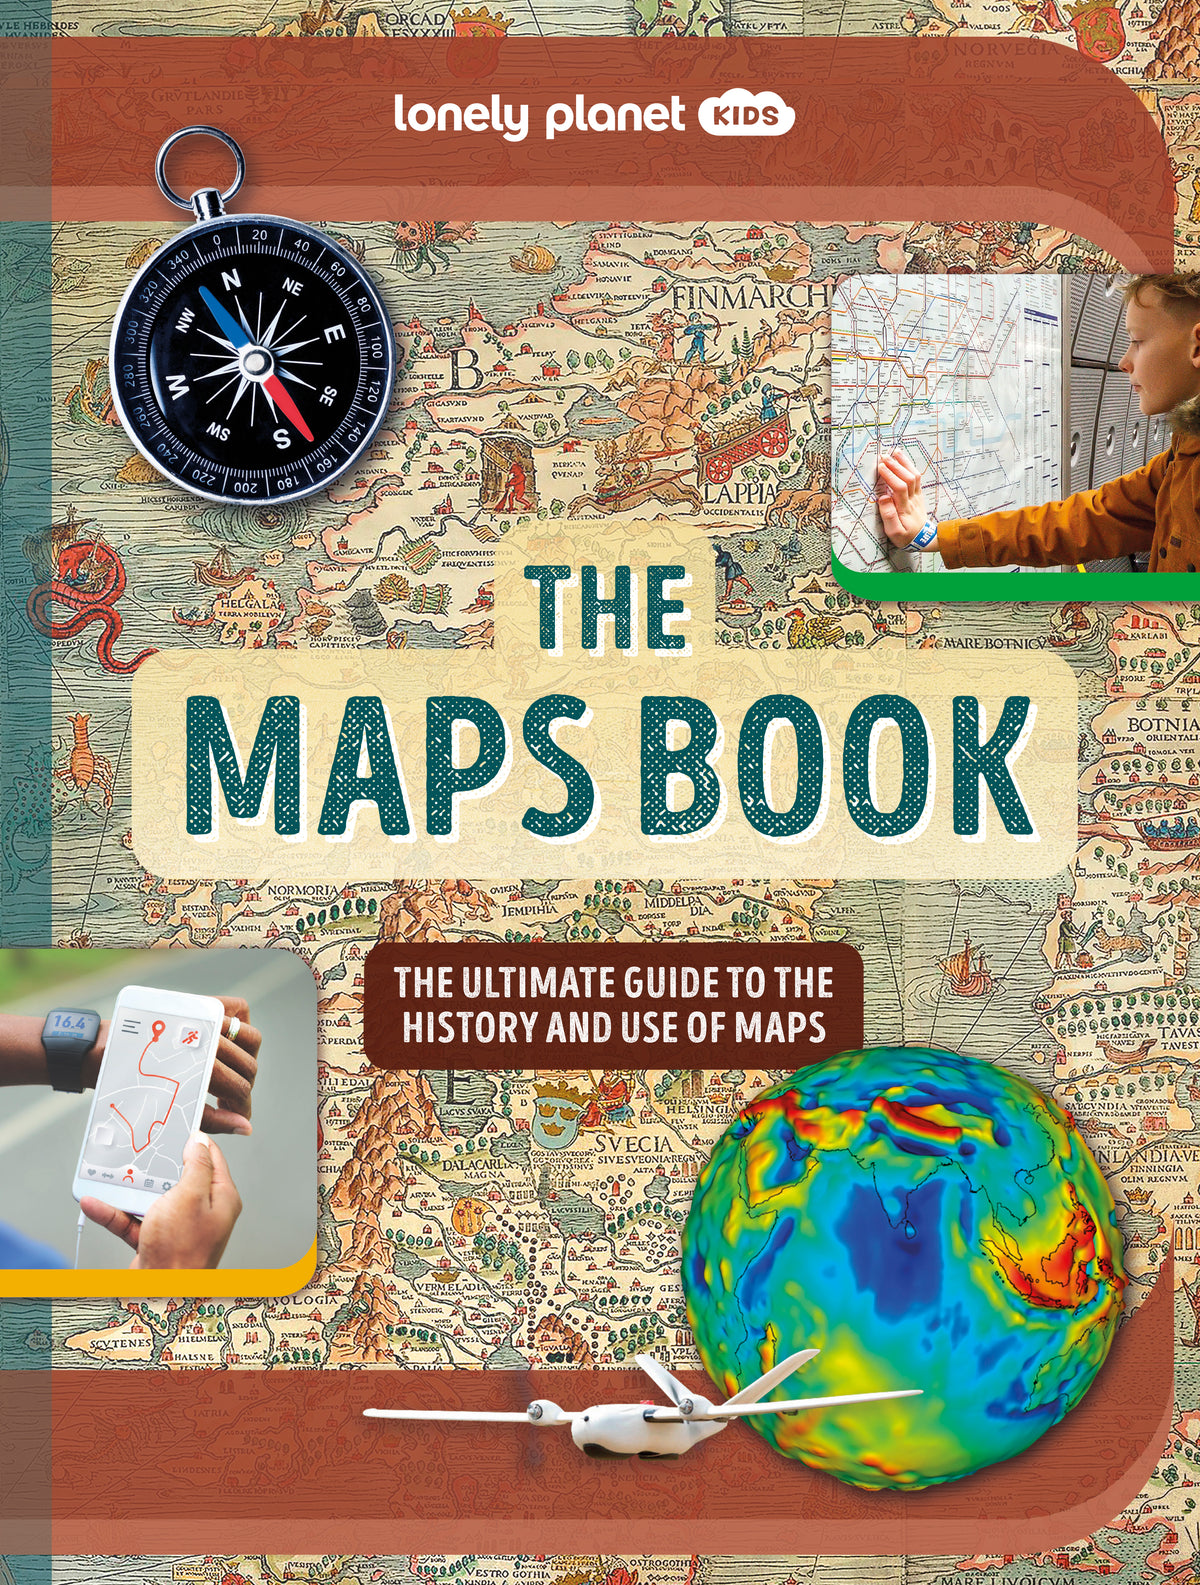 The Maps Book